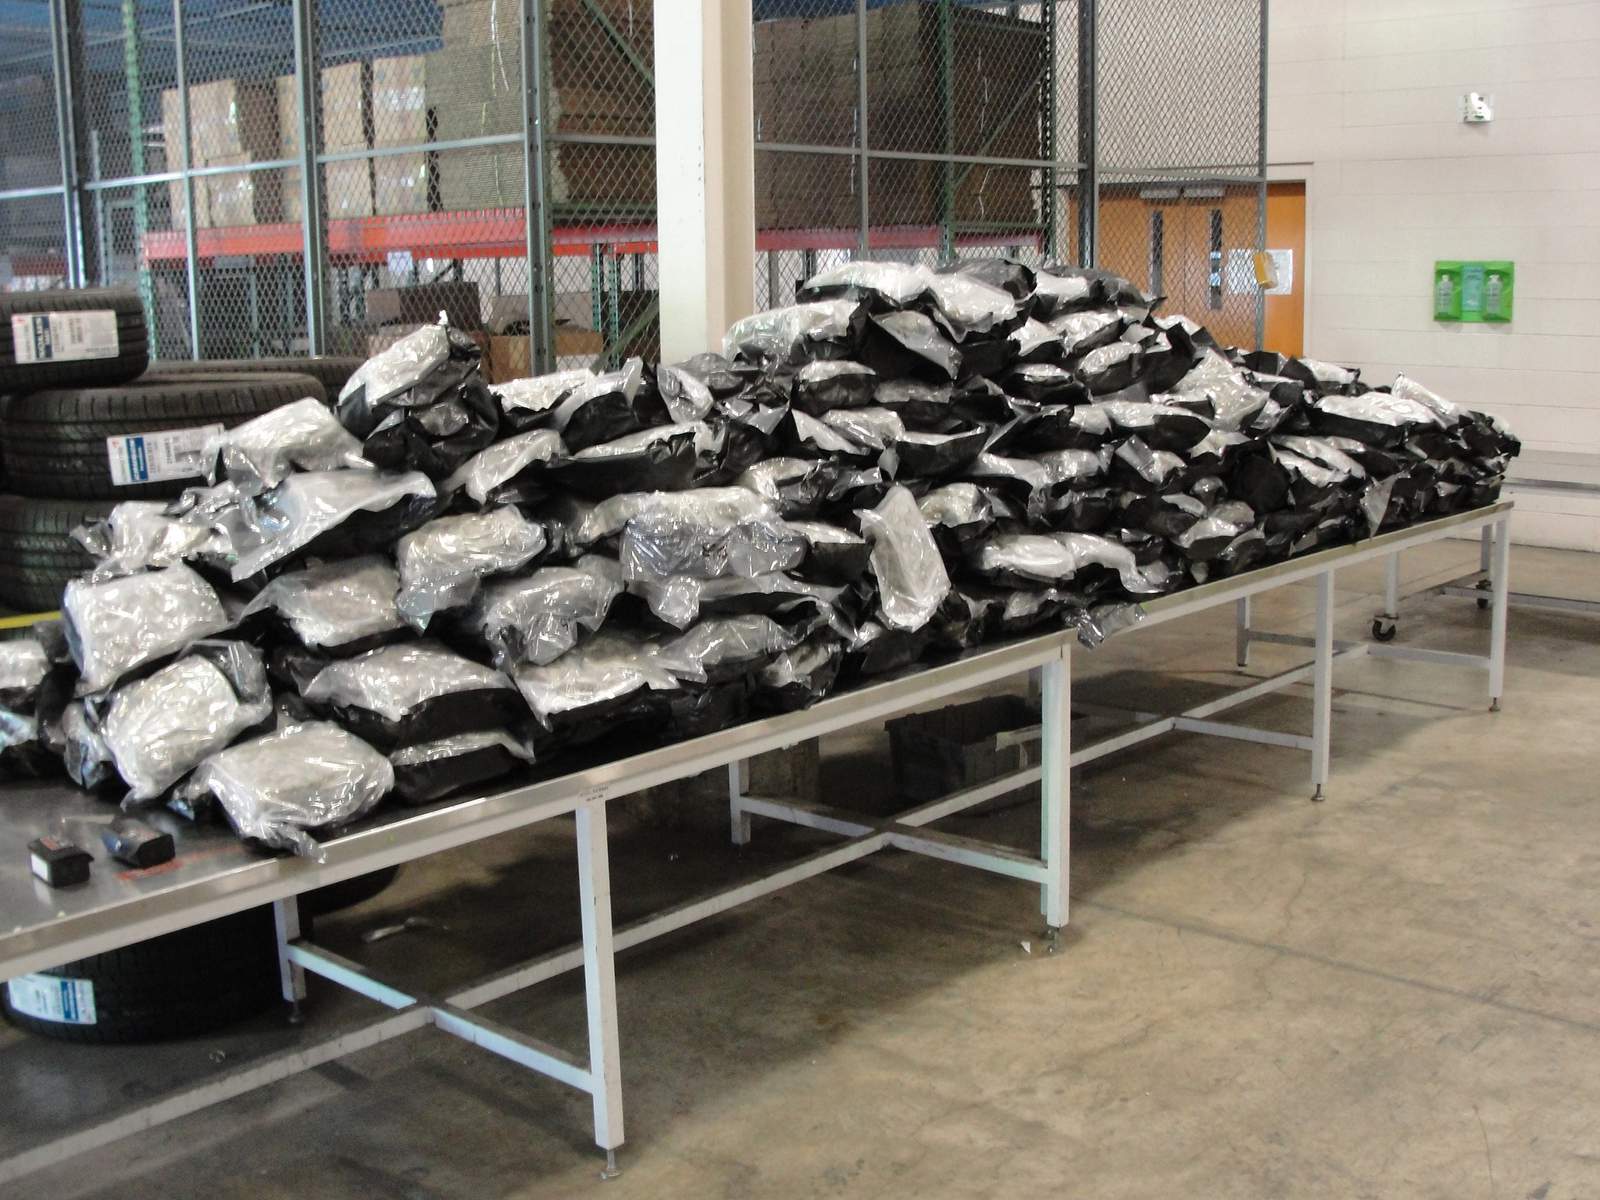 CBP officers seize over 400 pounds of marijuana in Detroit